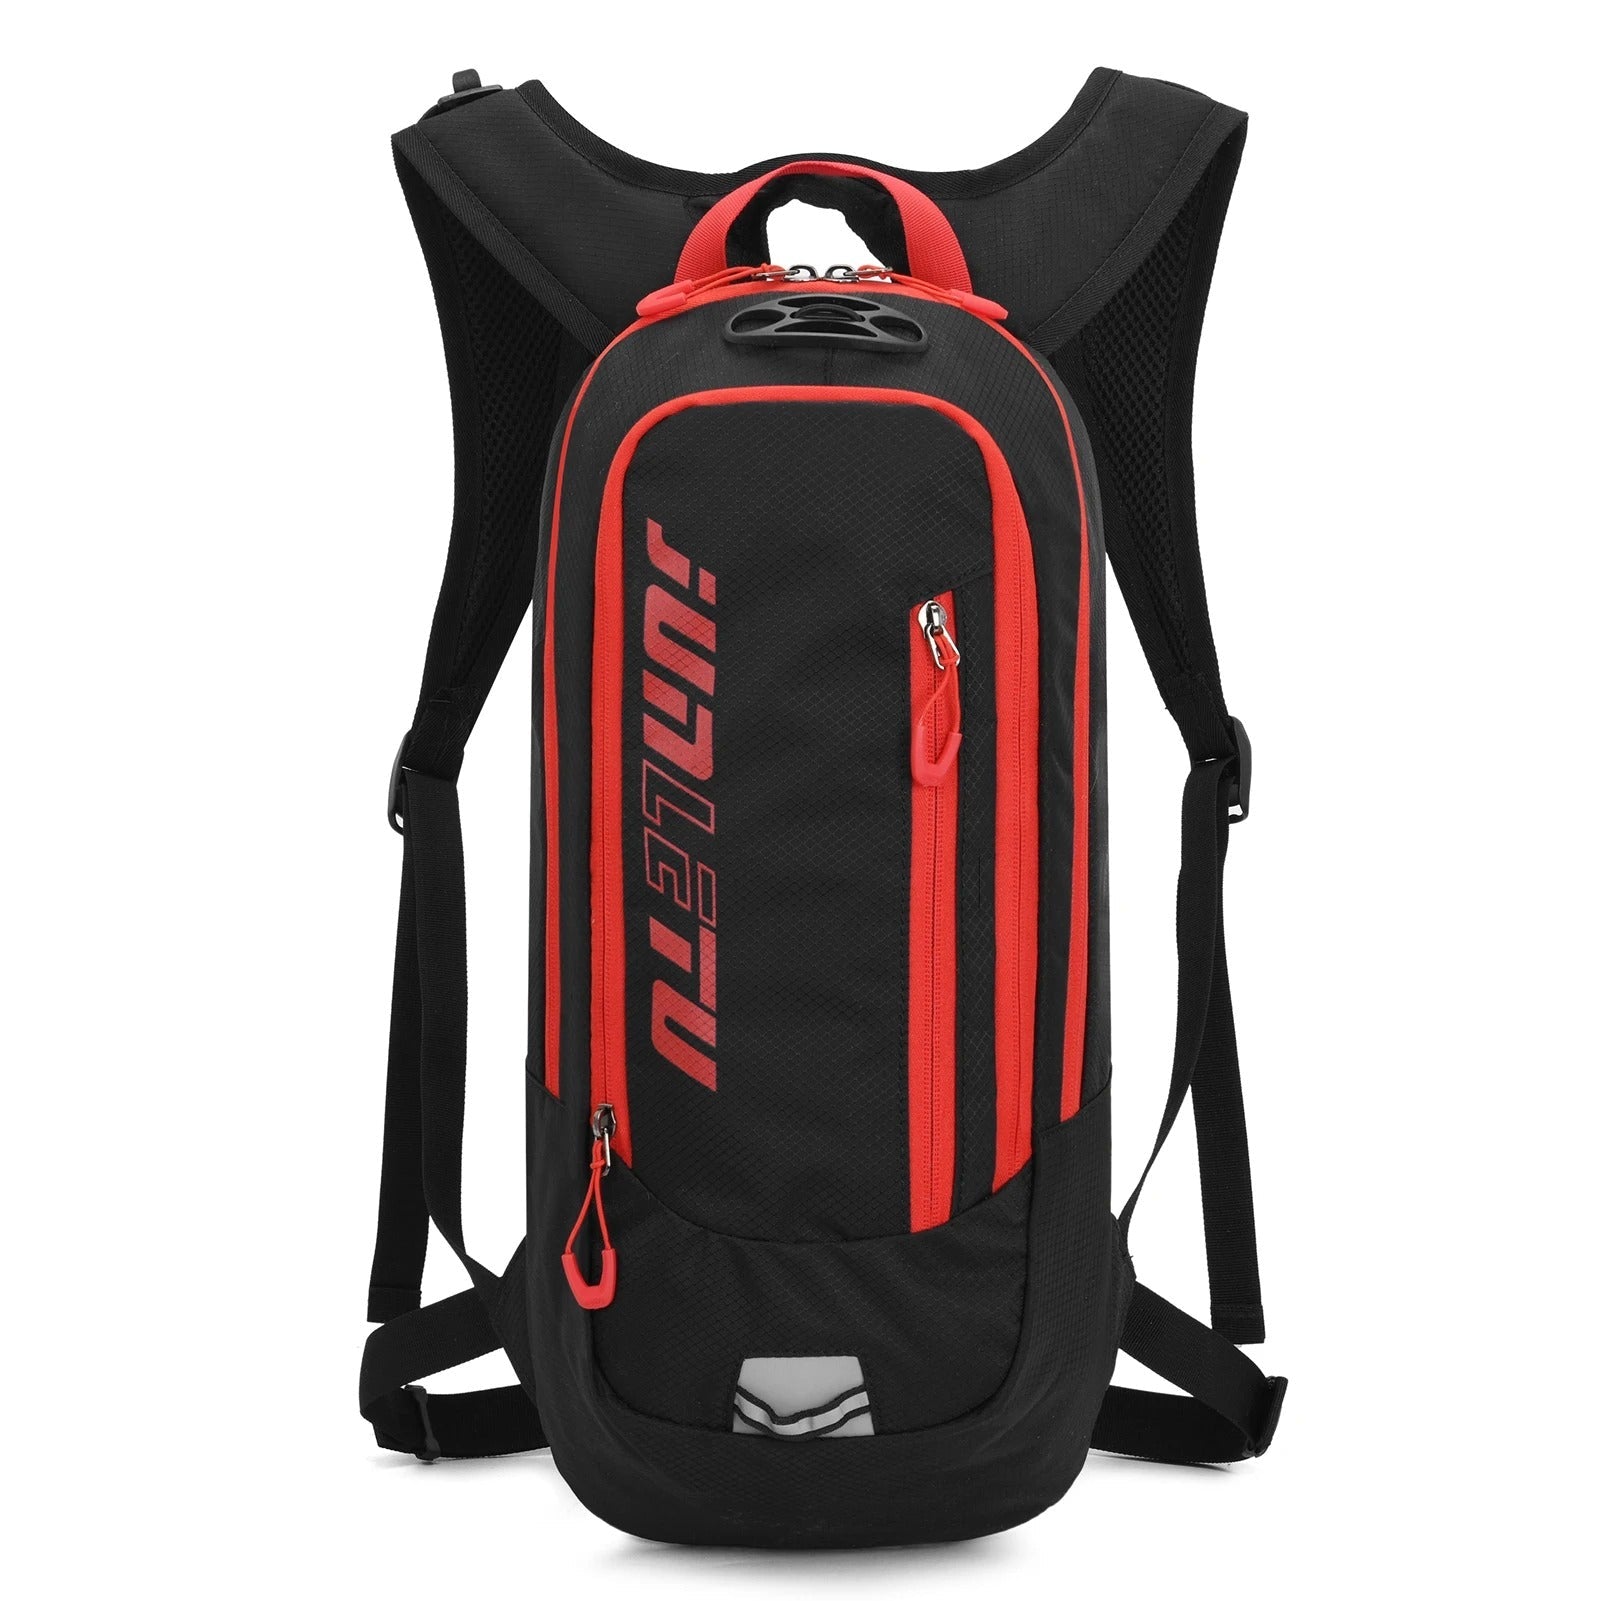 10L Cycling Backpack - Black Red